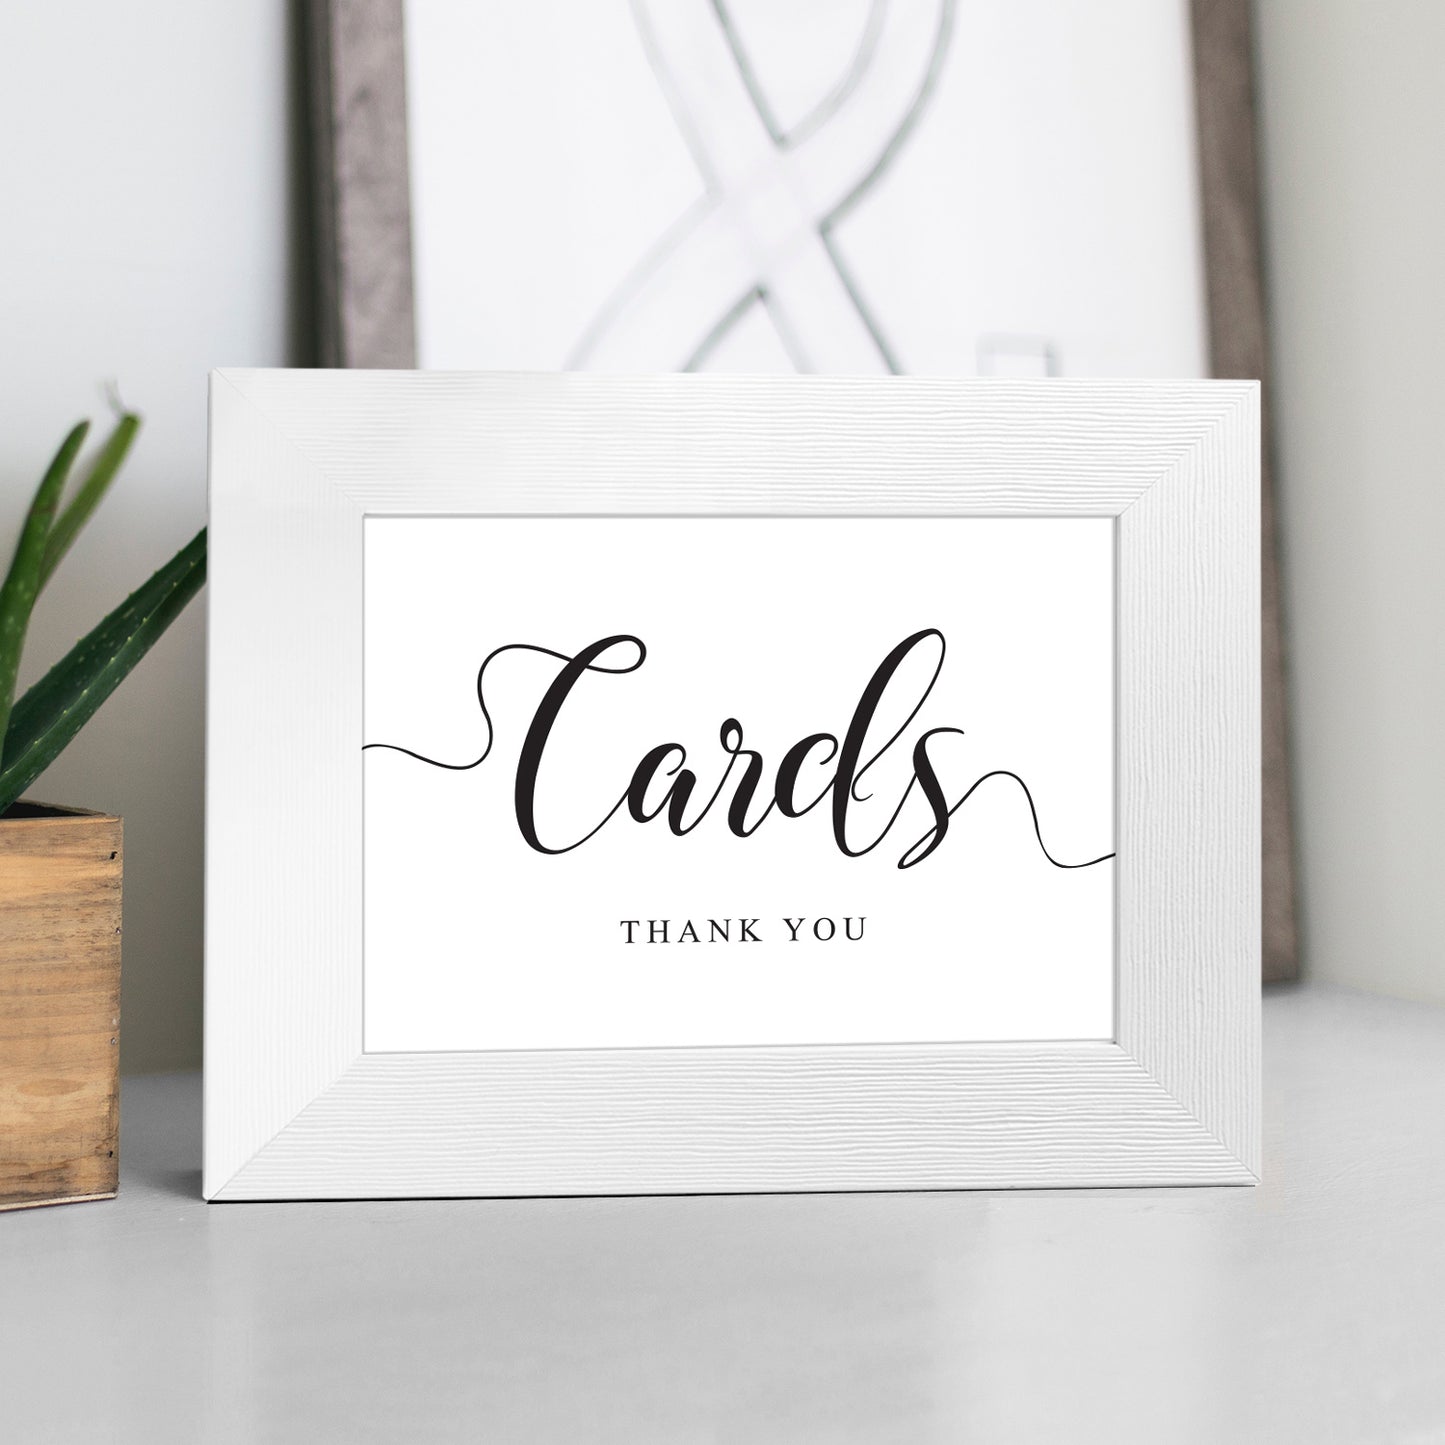 instant download wedding cards sign in a white frame